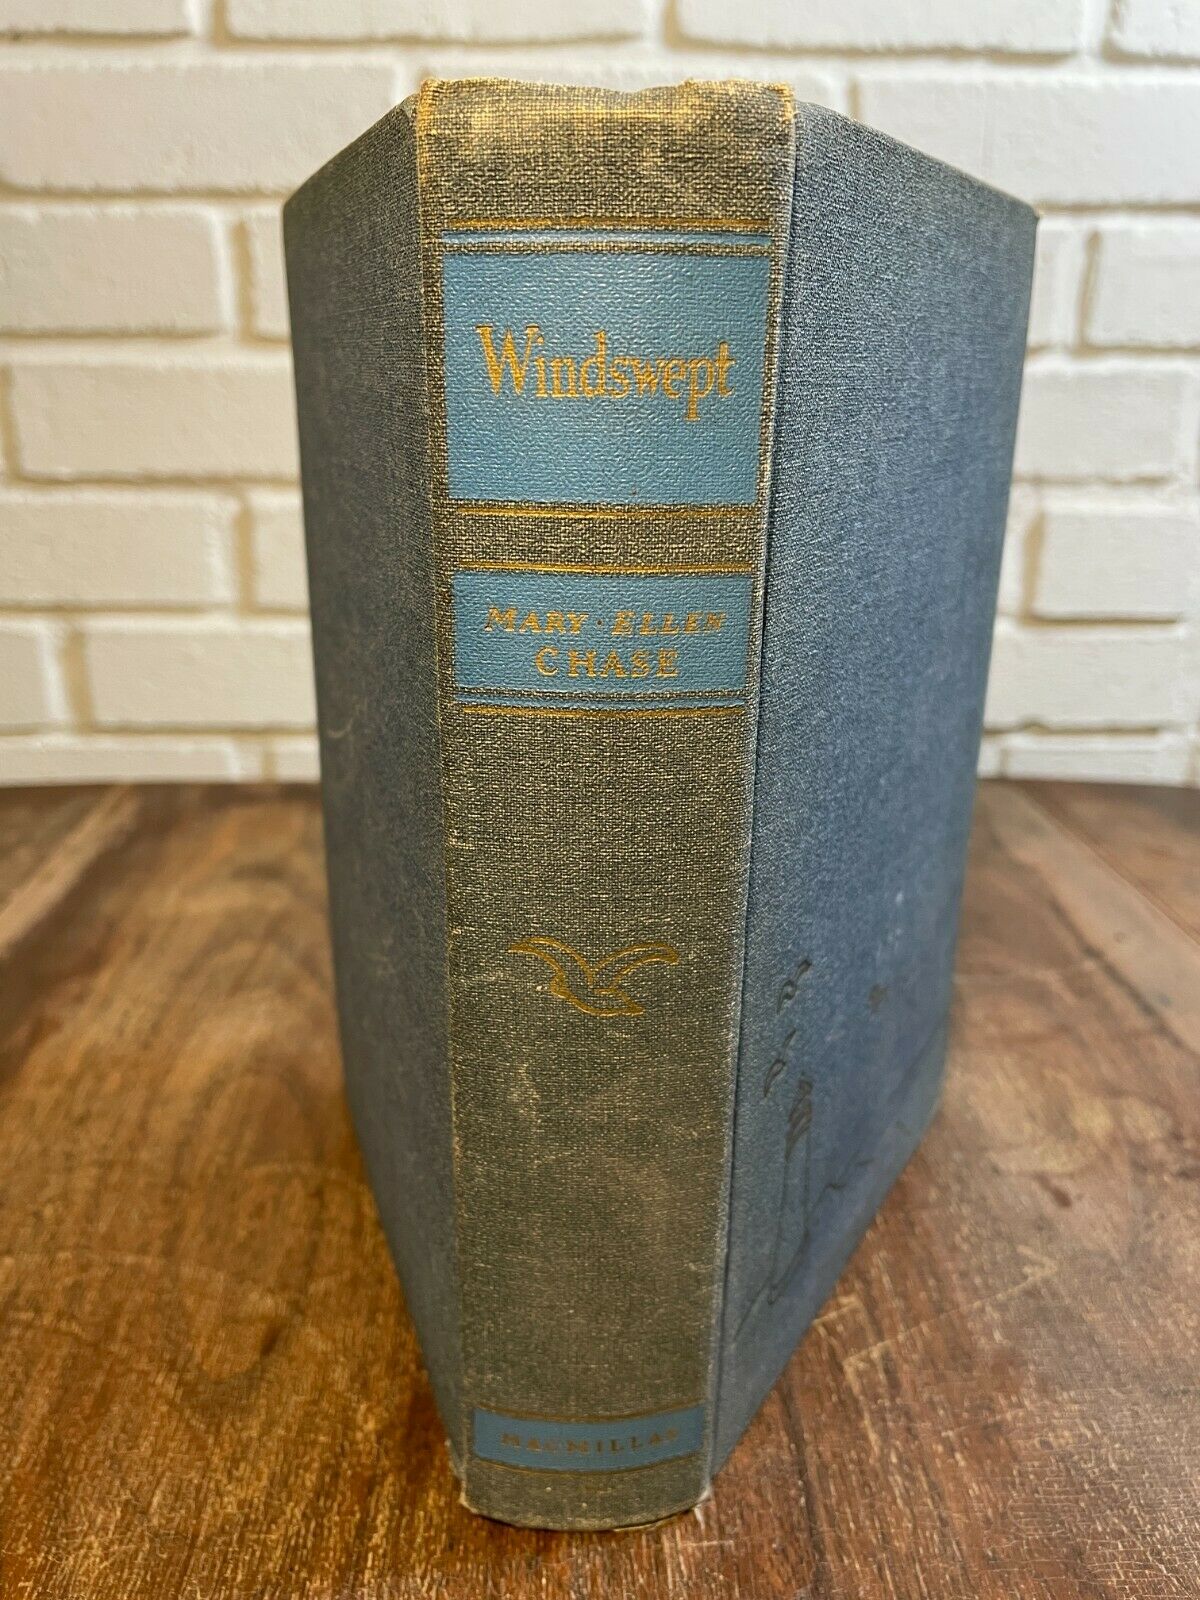 WINDSWEPT Mary Ellen Chase 1941 First Edition Hardcover - (C1)